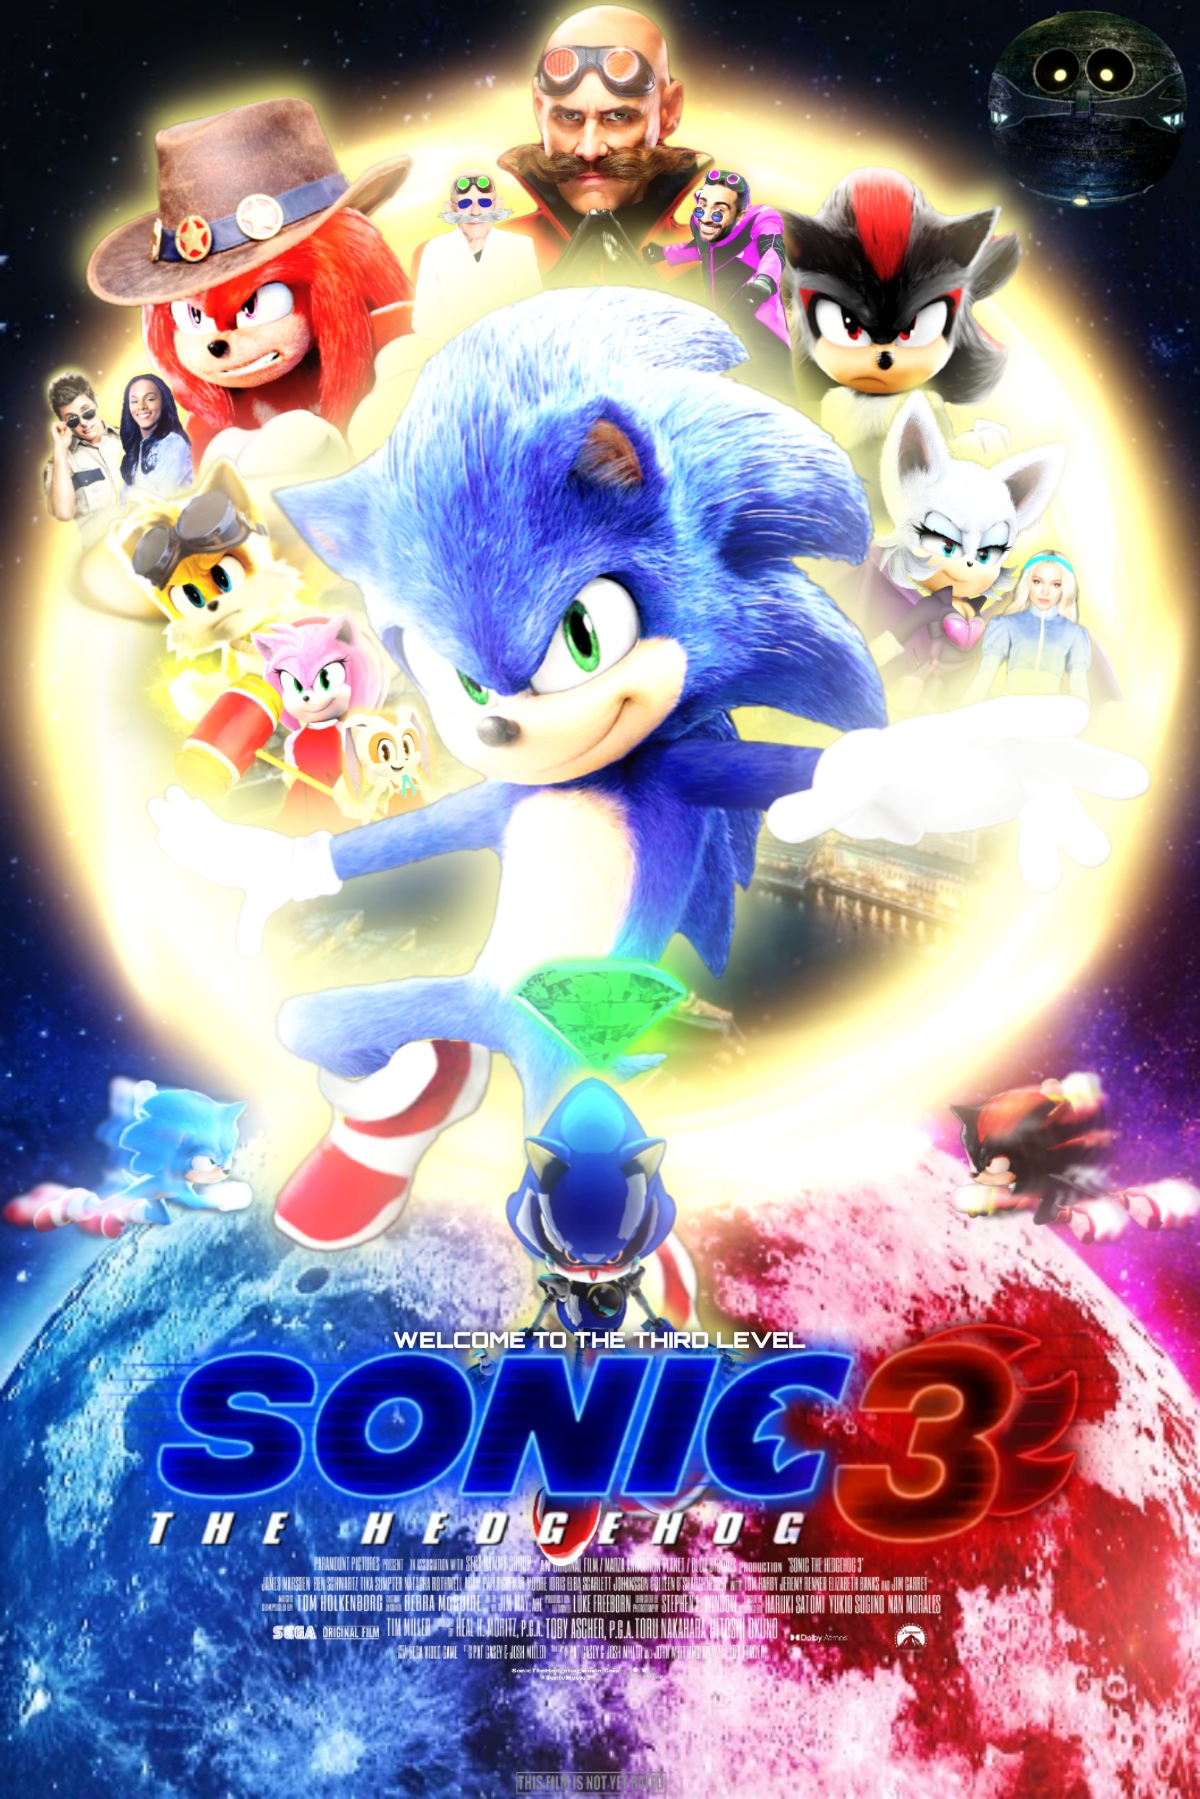 Sonic The Hedgehog 3 (2024) Concept Poster by lolthd on DeviantArt